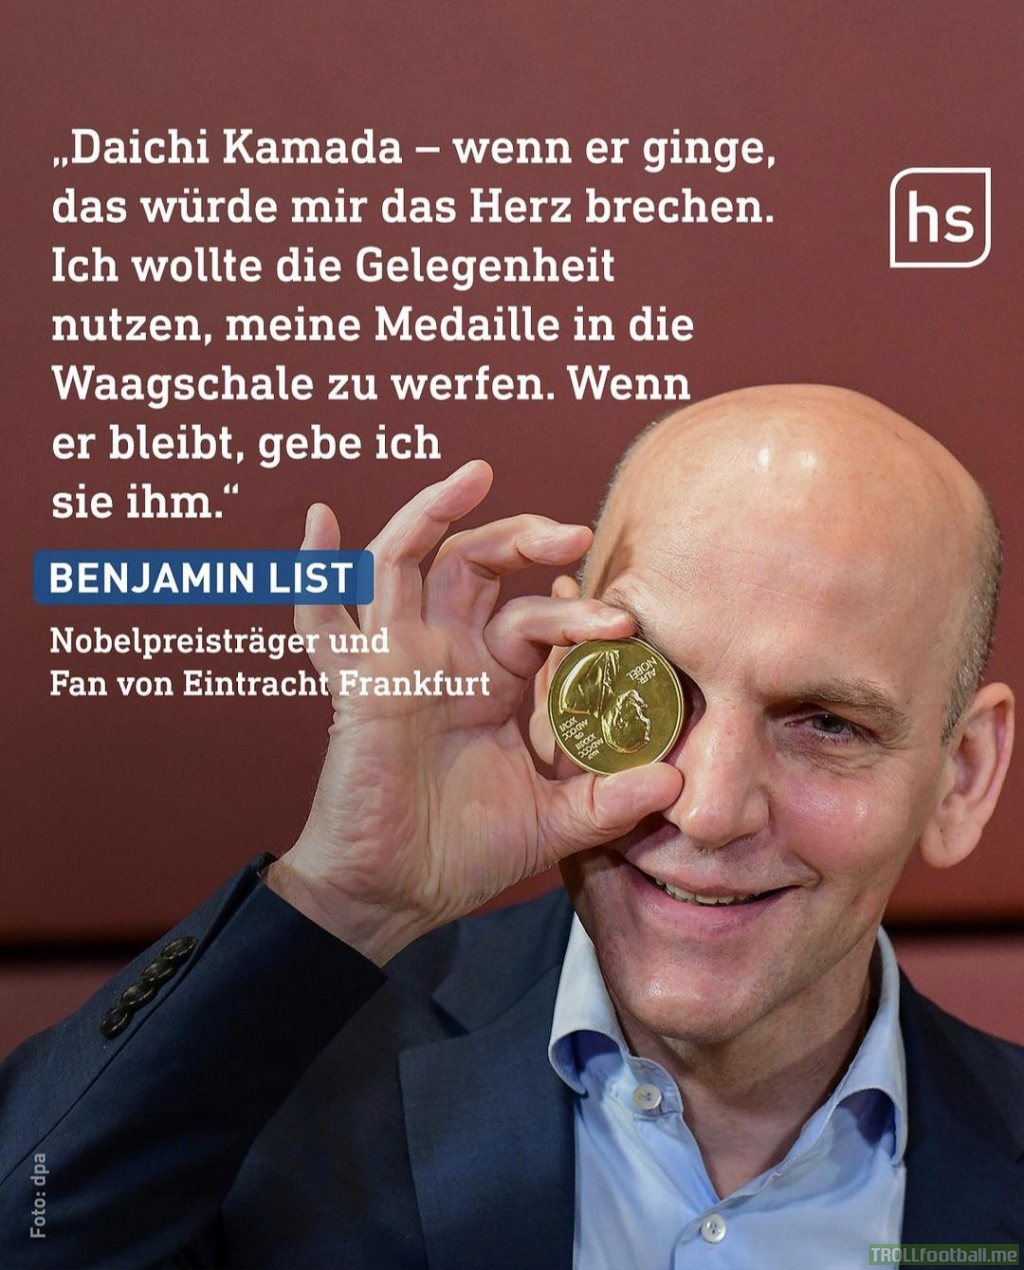 Winner of the 2021 Nobel Prize in Chemistry, Benjamin List from Frankfurt, offers his Nobel Medal to Daichi Kamada if he signs a new contract with Eintracht